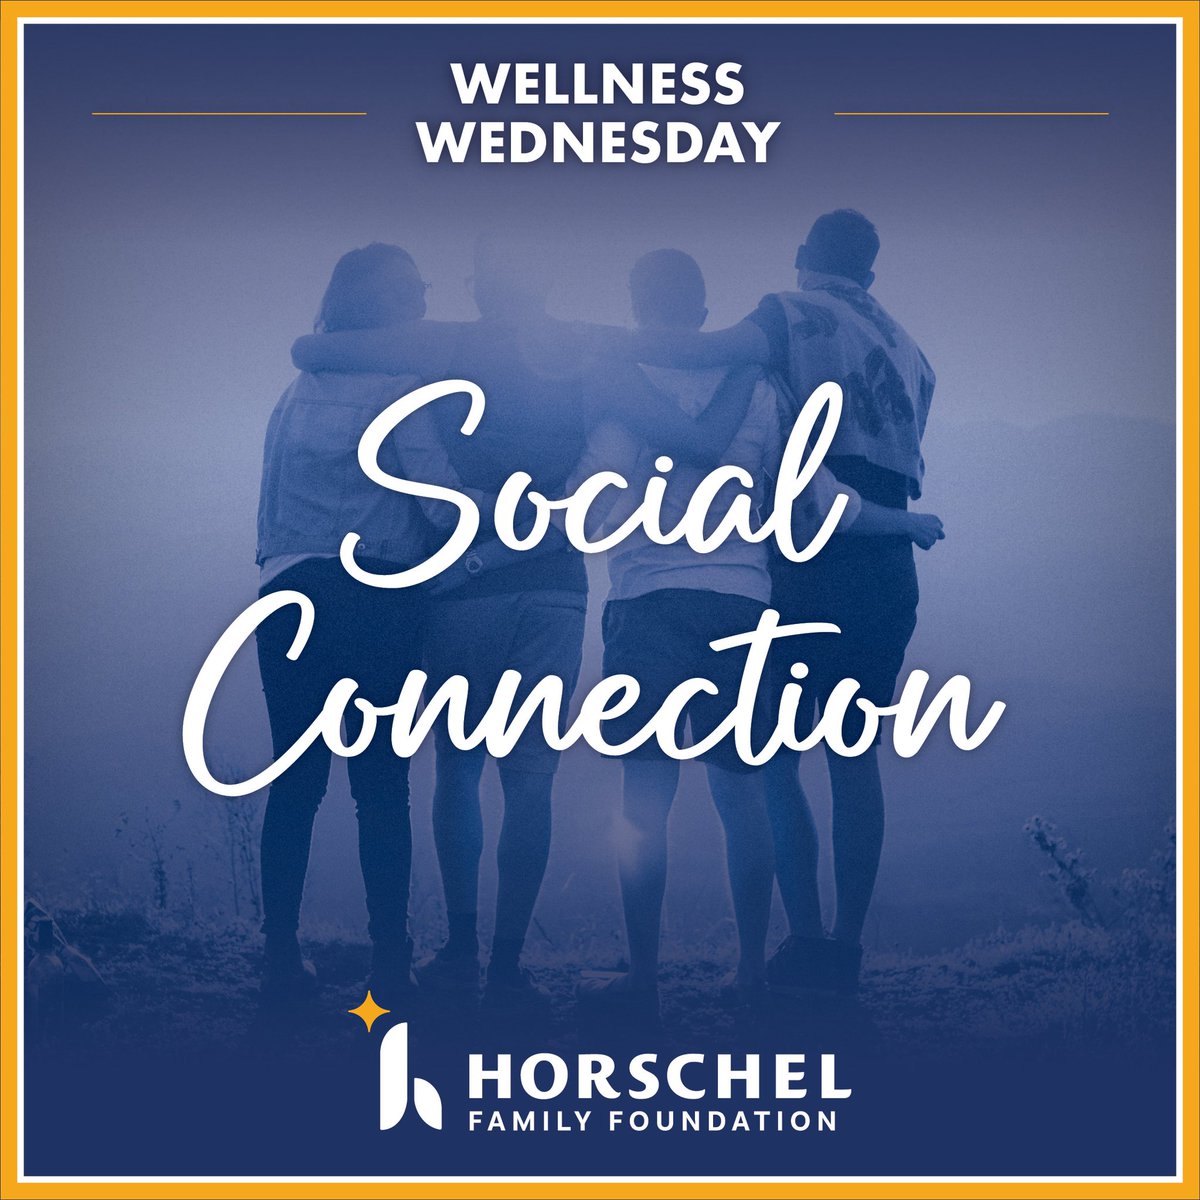 Welcome to our first Wellness Wednesday for Mental Health Awareness Month!Social connection is the most important protective factor against depression when analyzing over 100 potential protective factors in our control.This week,offer a smile &make a connection with those around!